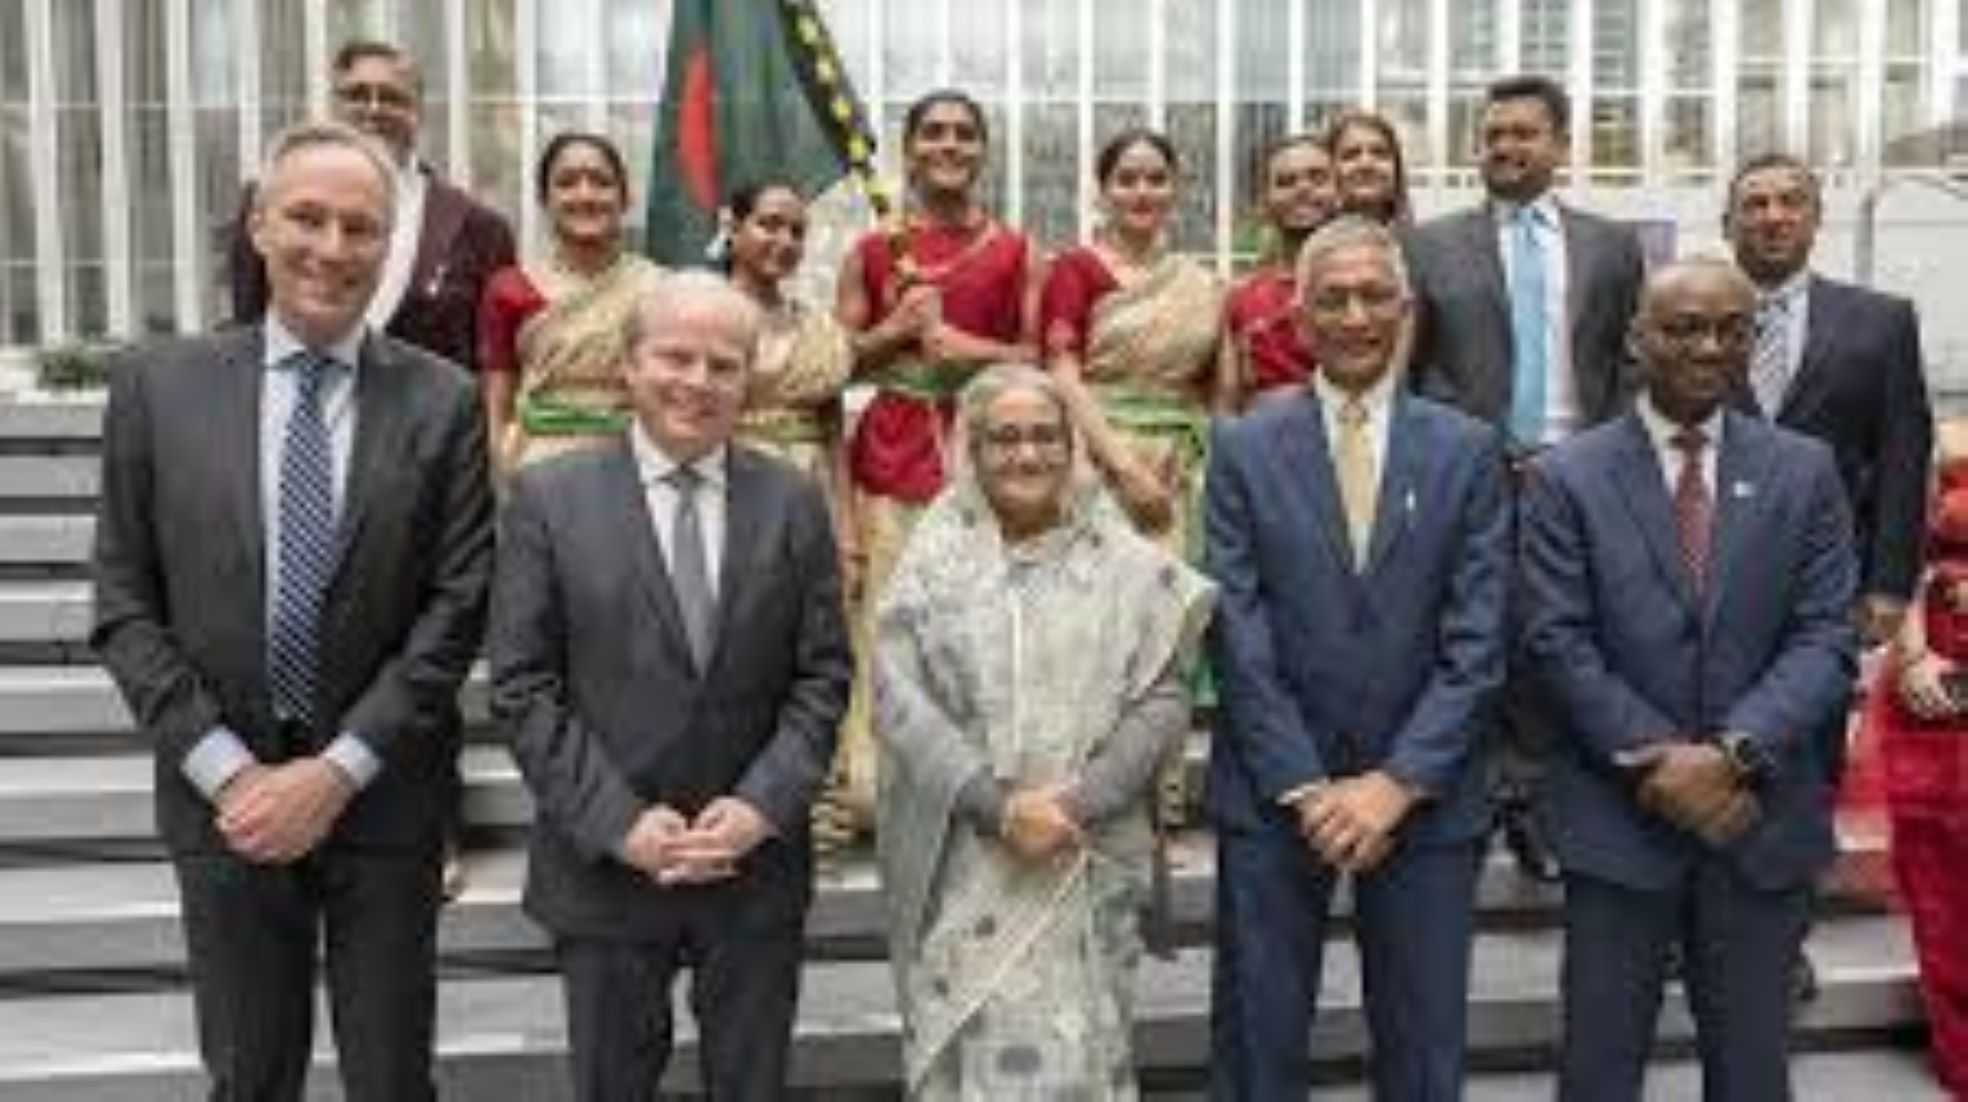 Bangladesh Signed Agreements With World Bank To Boost Climate-Resilient Agriculture, Road Safety Improvement